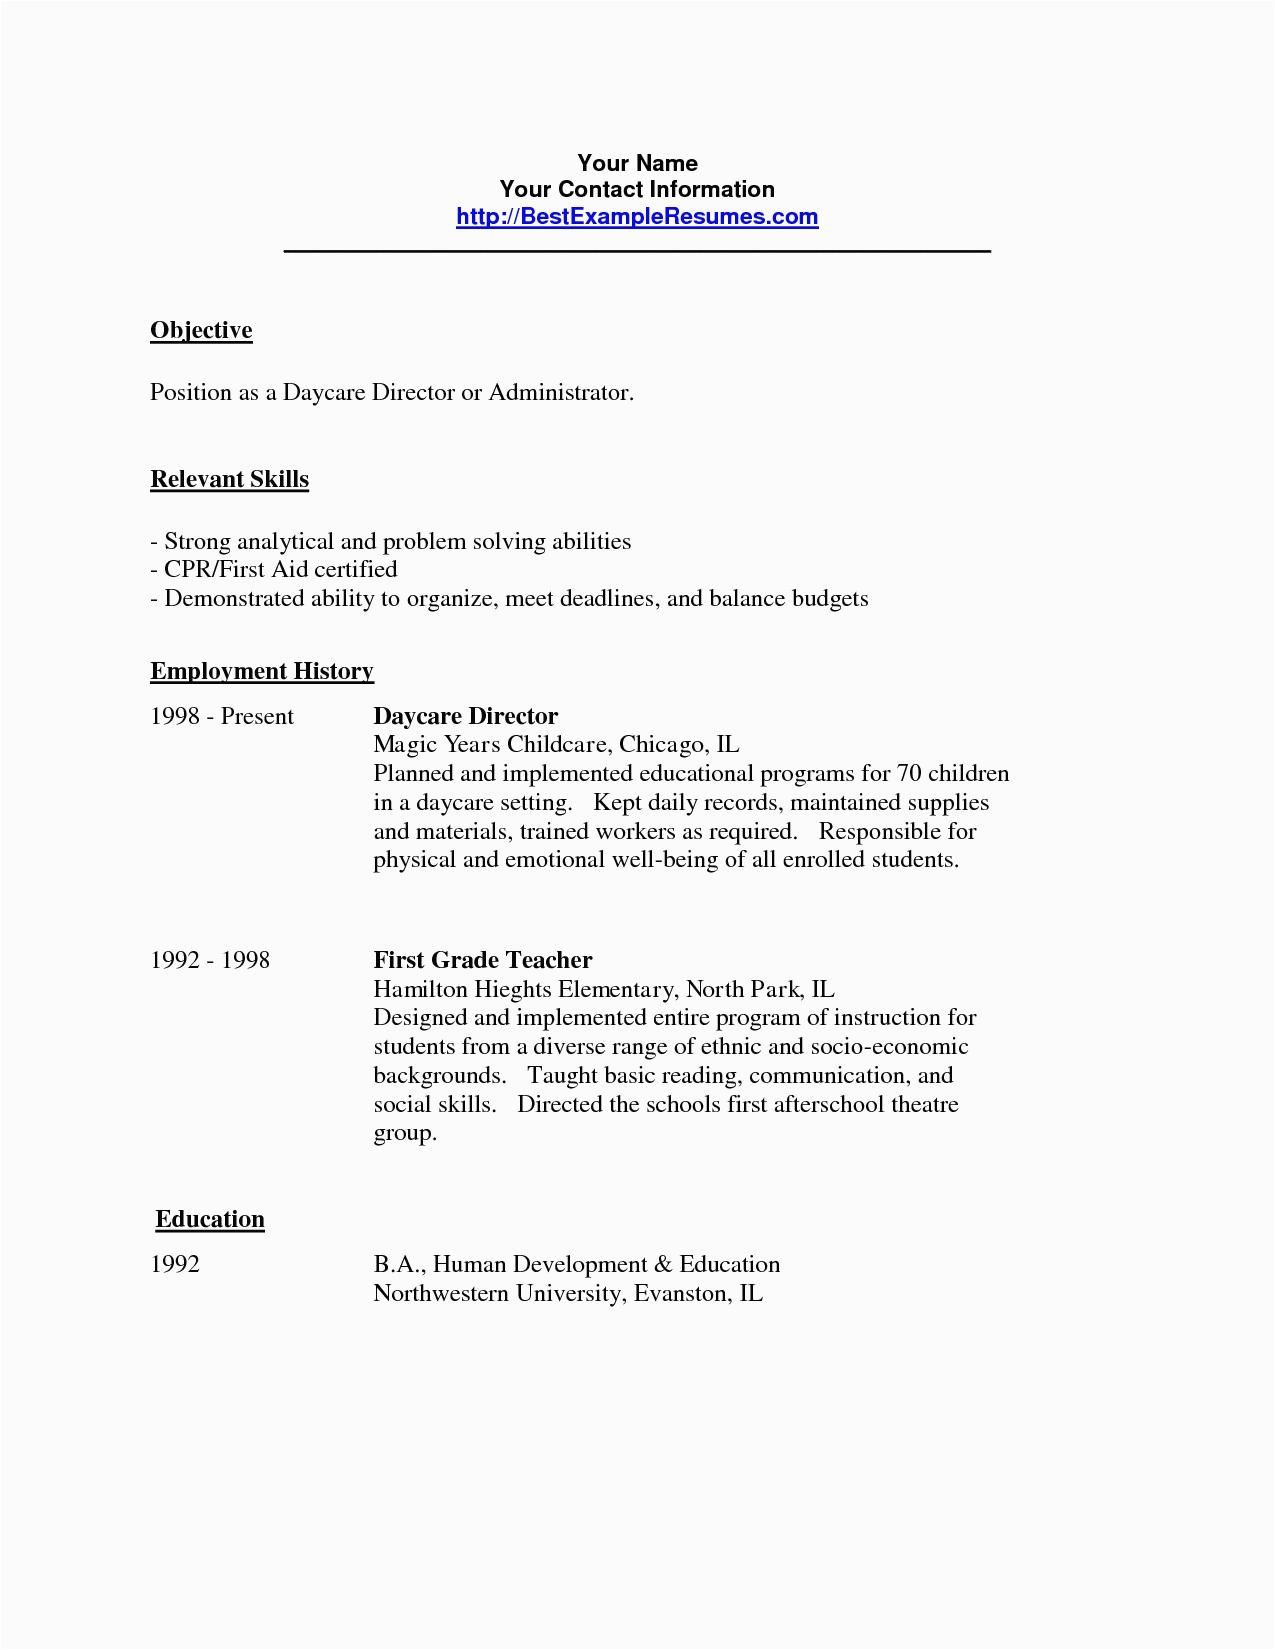 Sample Resume for Child Care Worker with No Experience Cover Letter for Daycare Worker No Experience